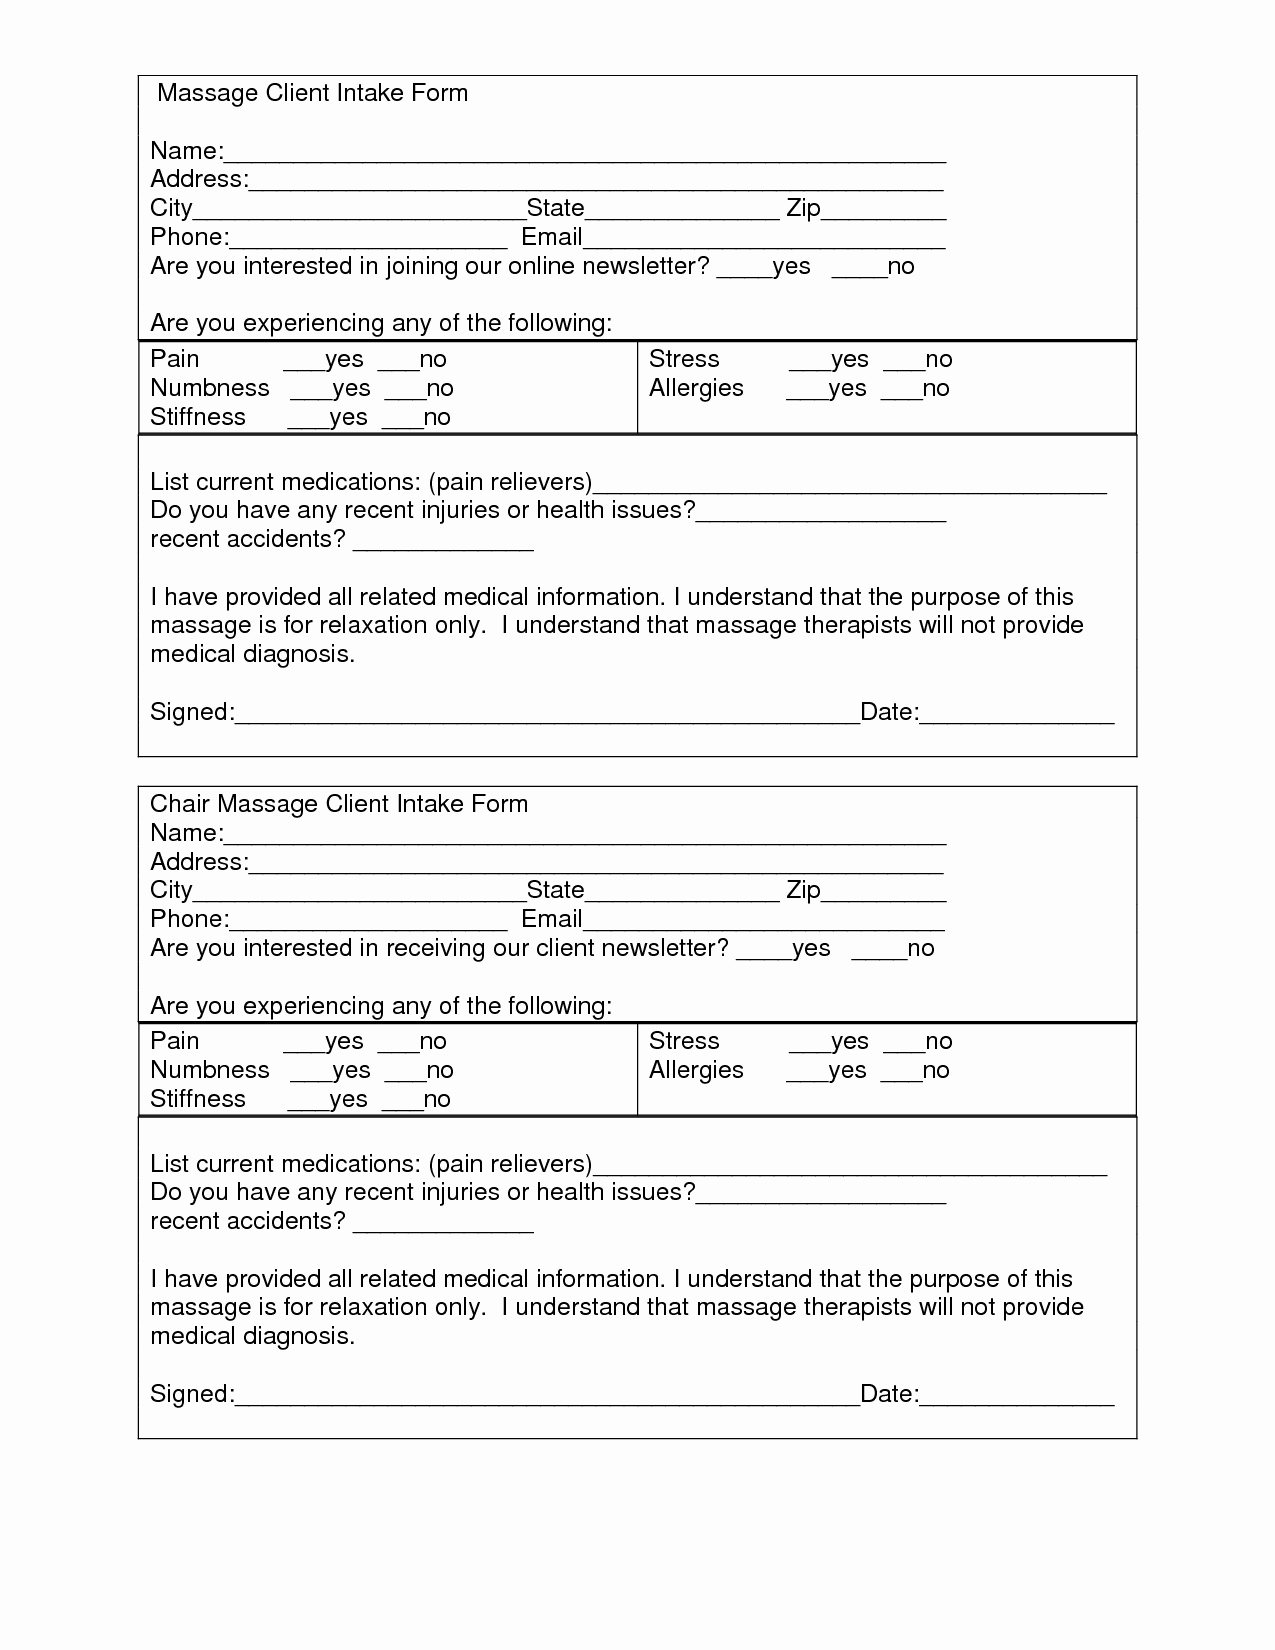 Mental Health Intake form Template Fresh Massage Client Intake form Template